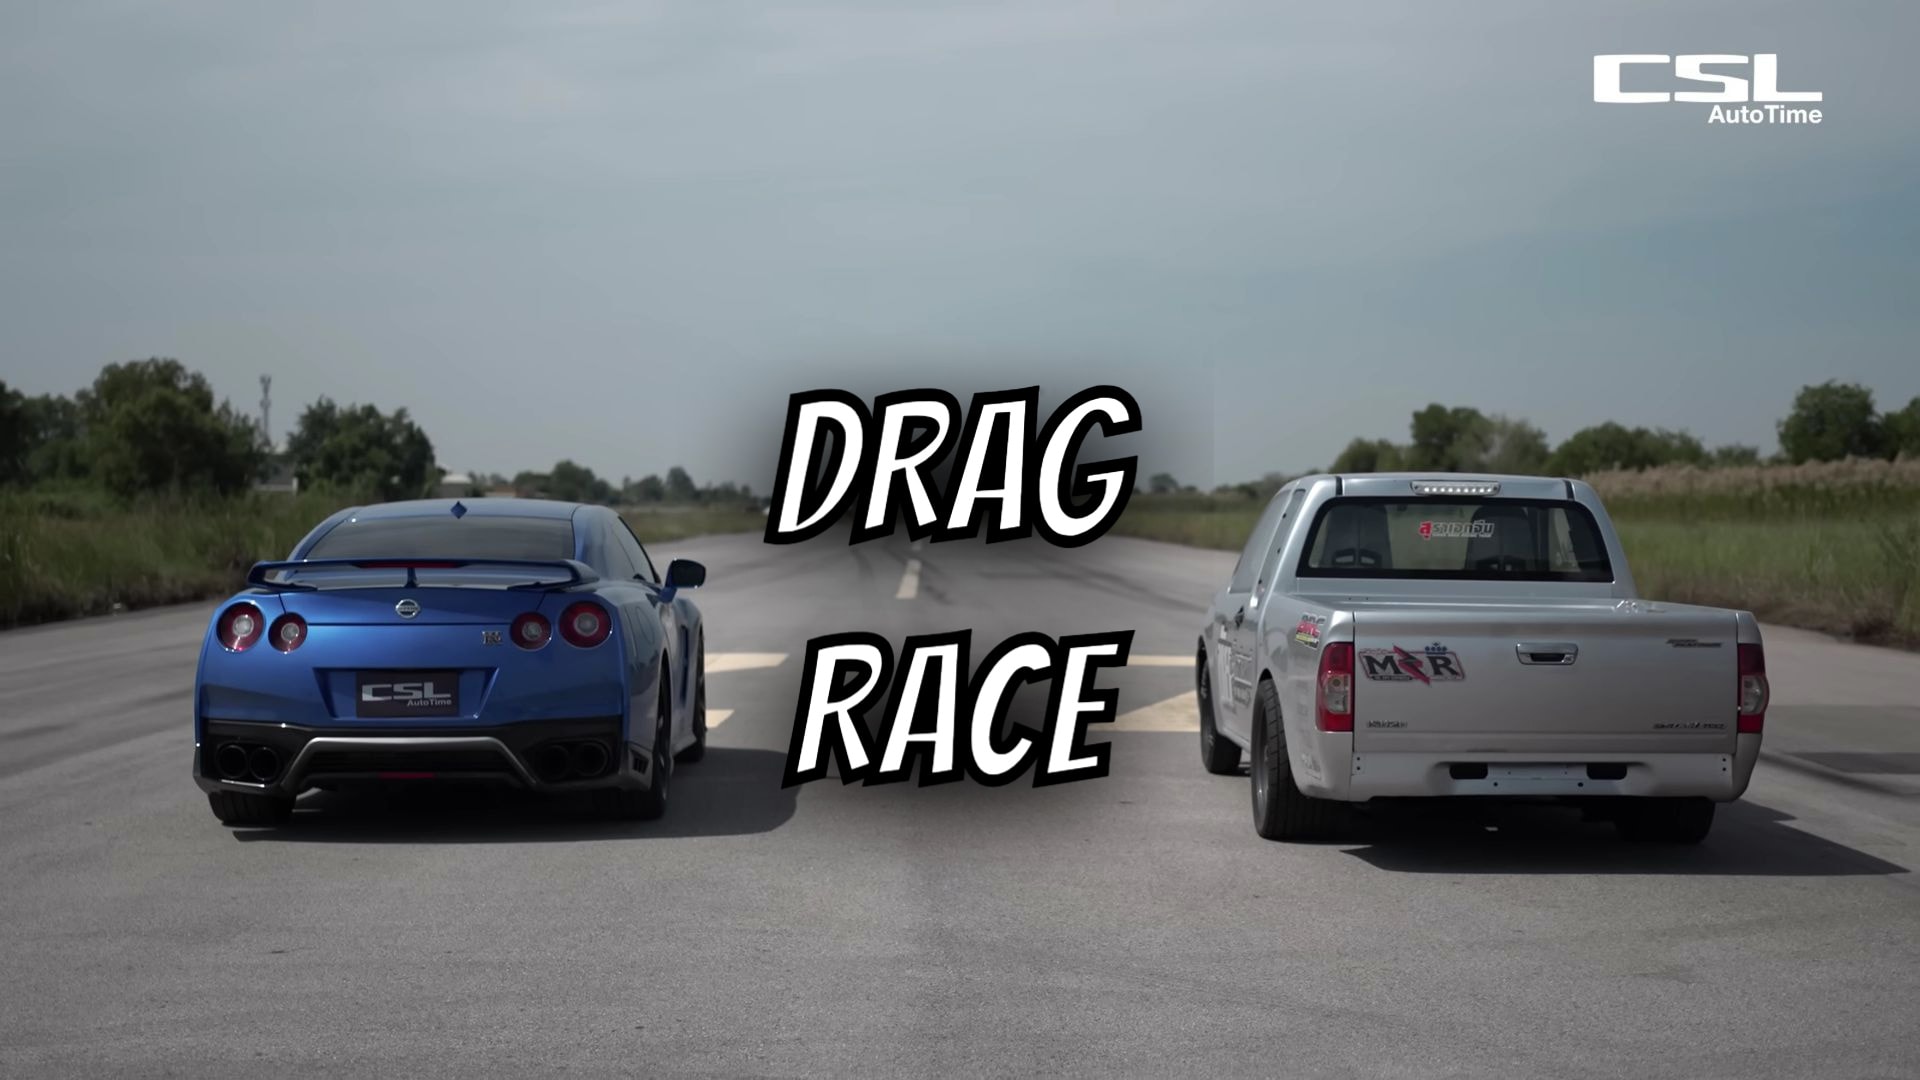 Stock Nissan GT-R Drag Races Modified Isuzu D-Max Pickup Truck, It’s Closer Than Expected